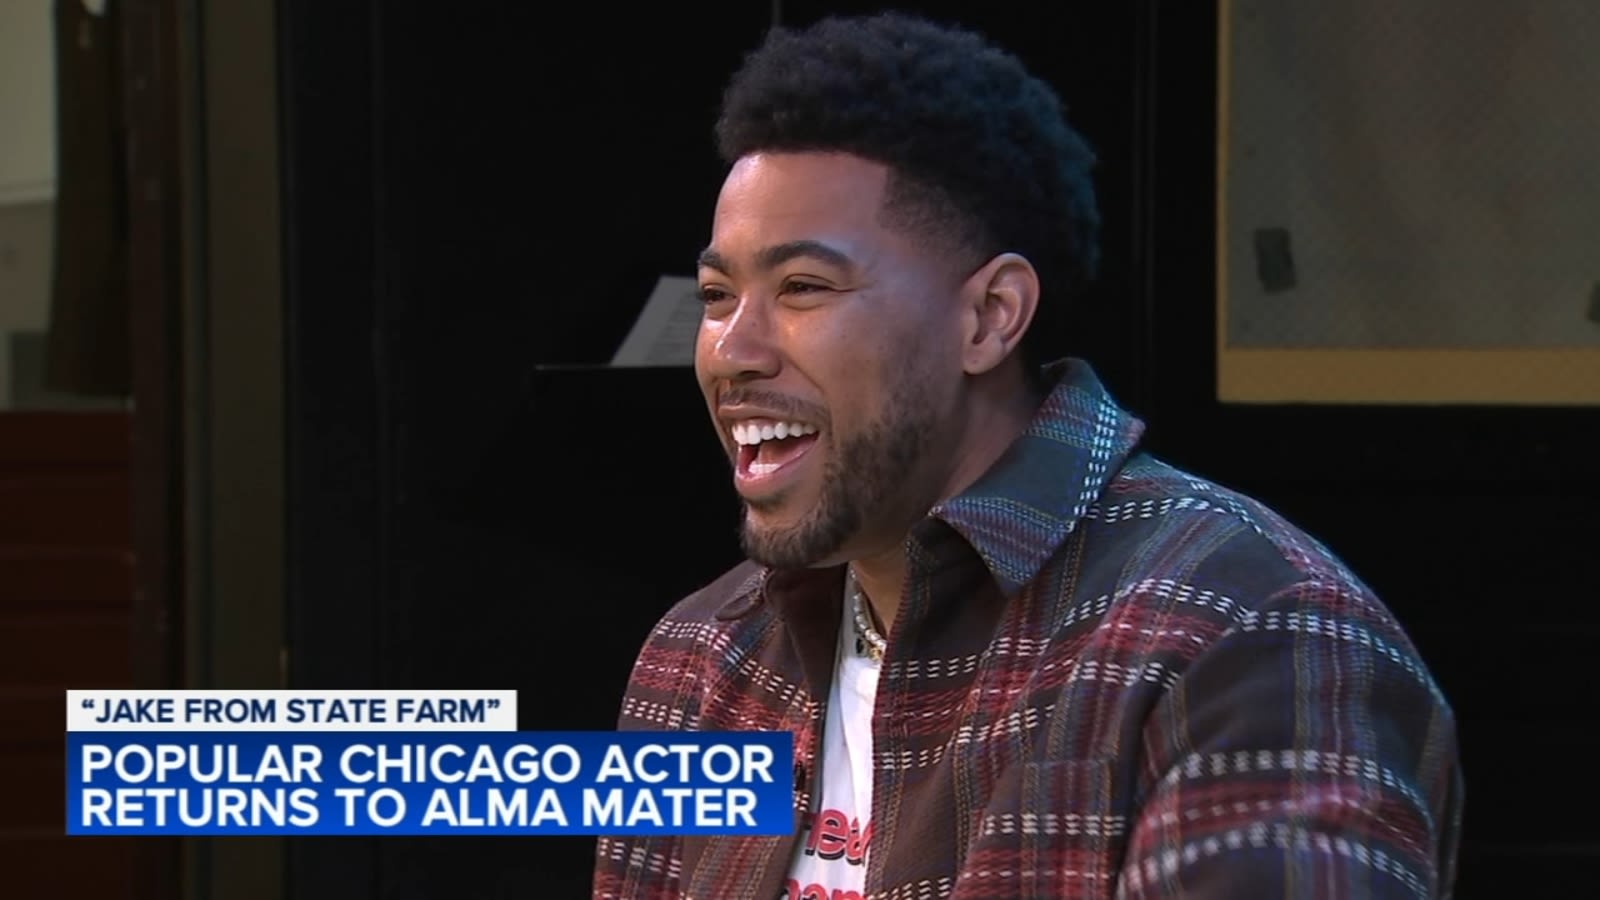 'Jake from State Farm' actor Kevin Miles reflects on Chicago roots: 'It was very supportive here'